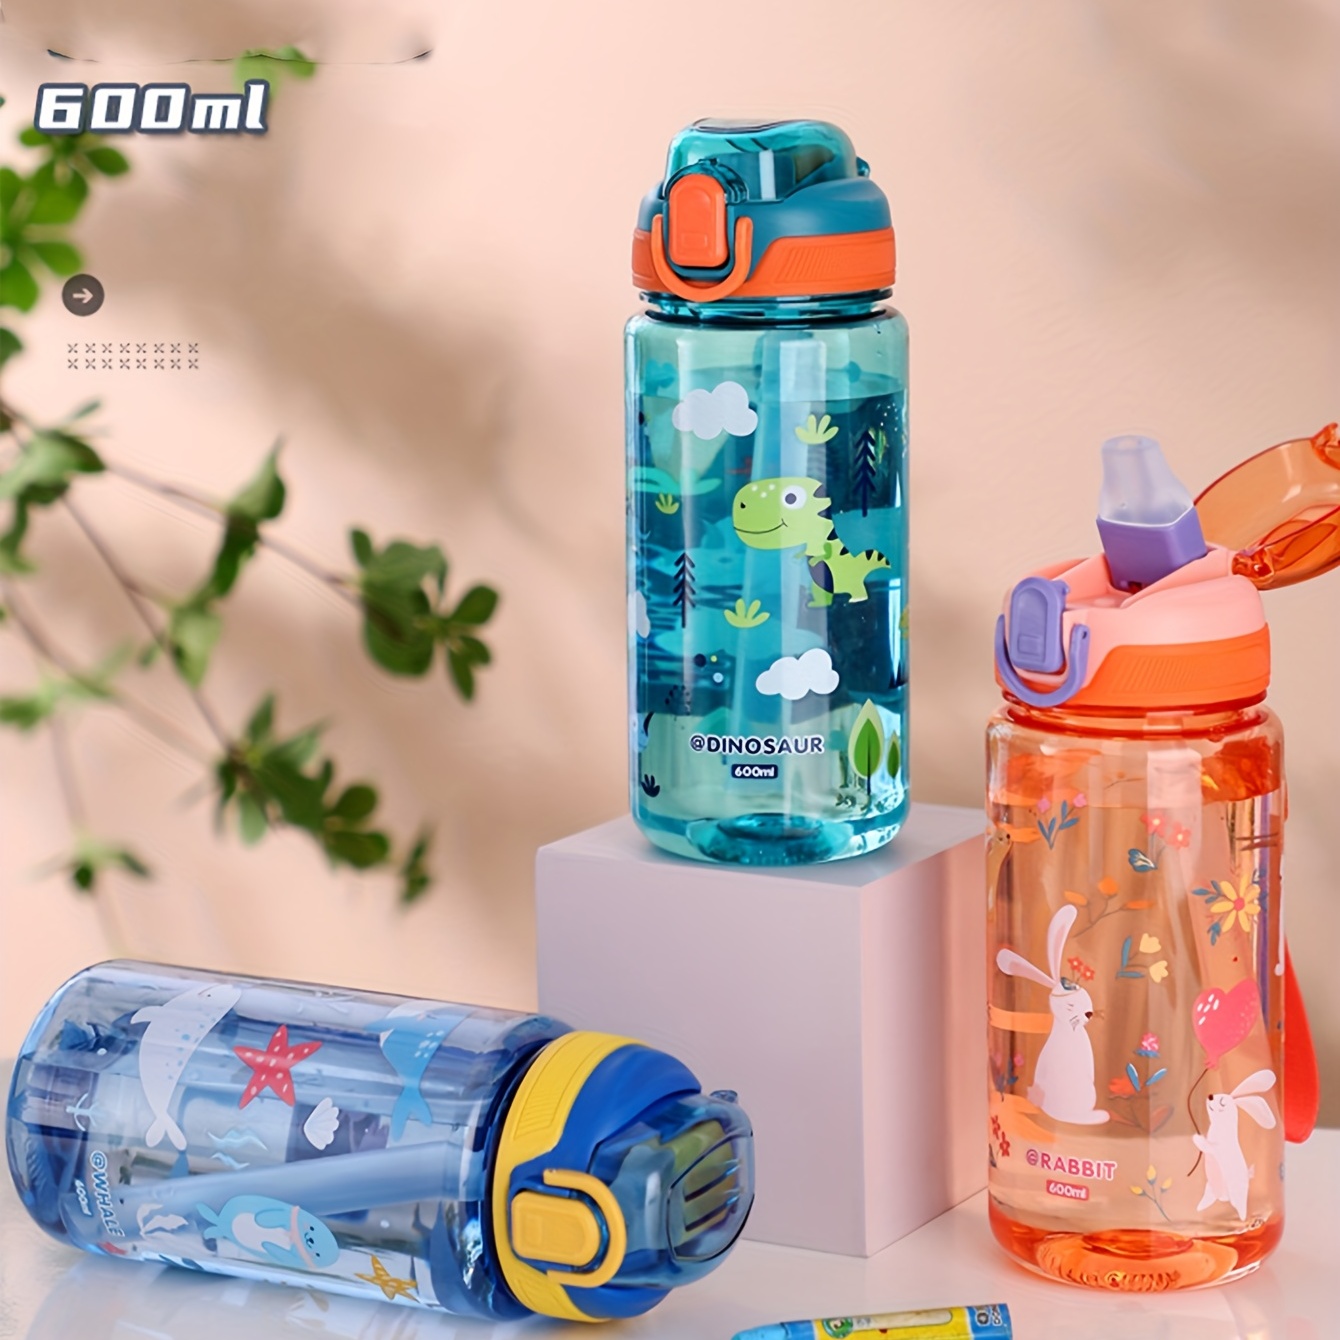 16.2oz Leak-proof Kids Water Bottle with Straw Push Button